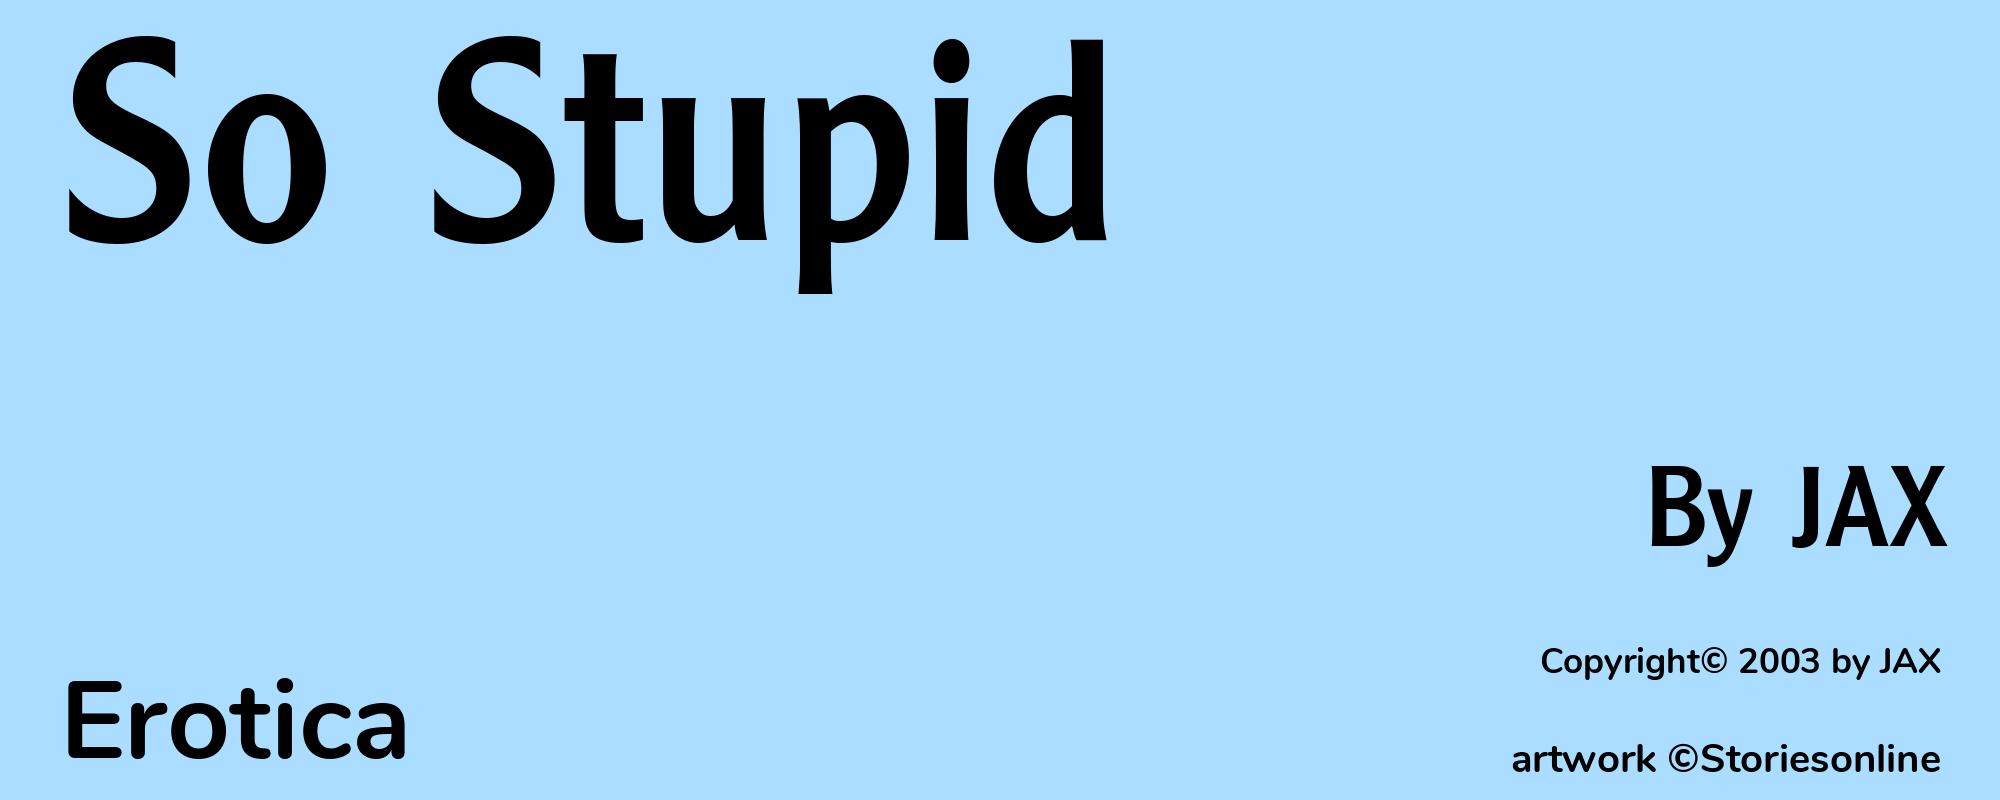 So Stupid - Cover